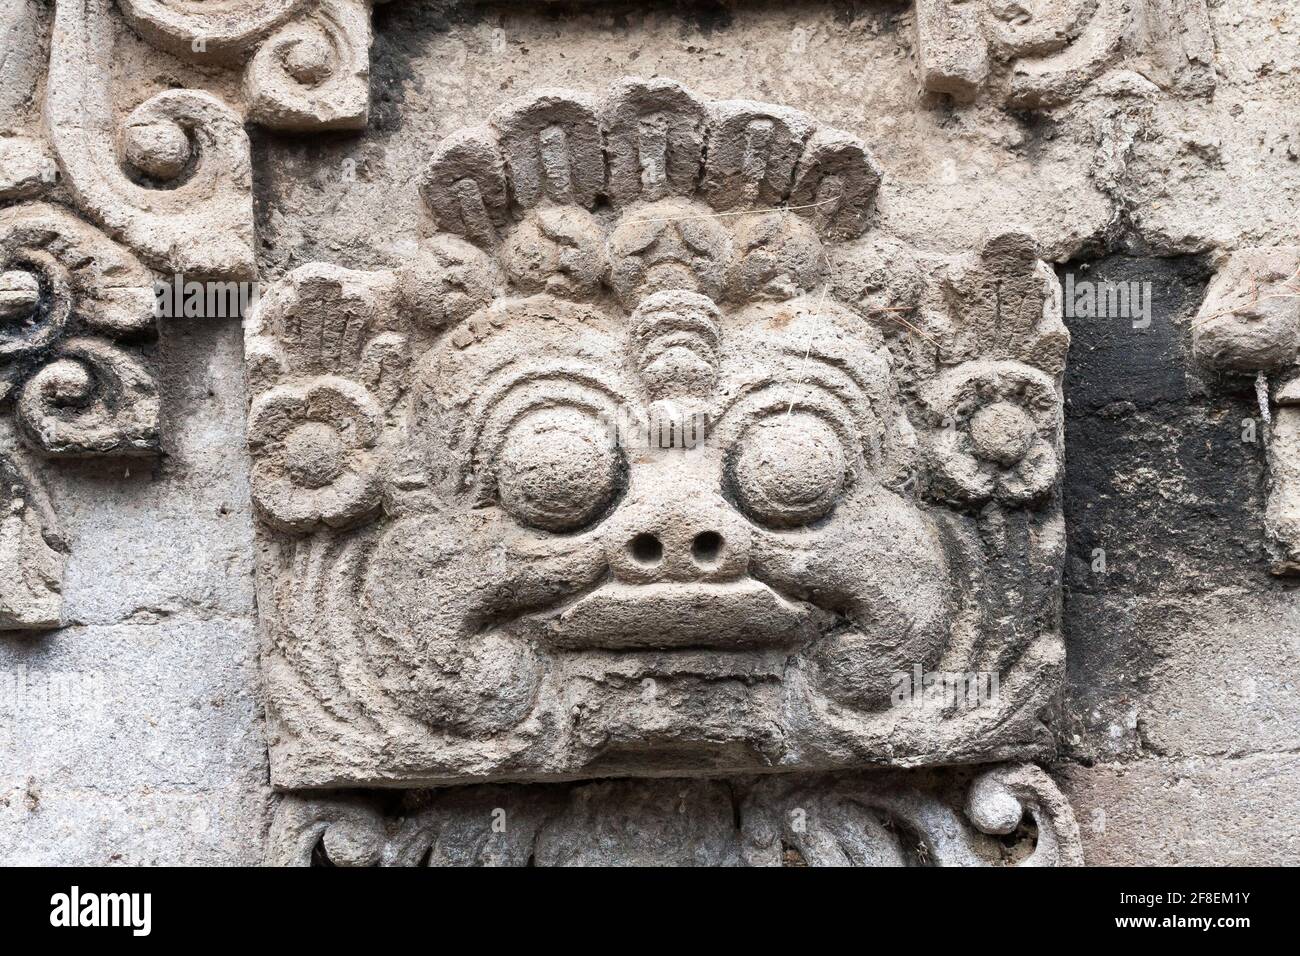 Stone carving outside a Balinese Hindu village temple, Bali, Indonesia Stock Photo